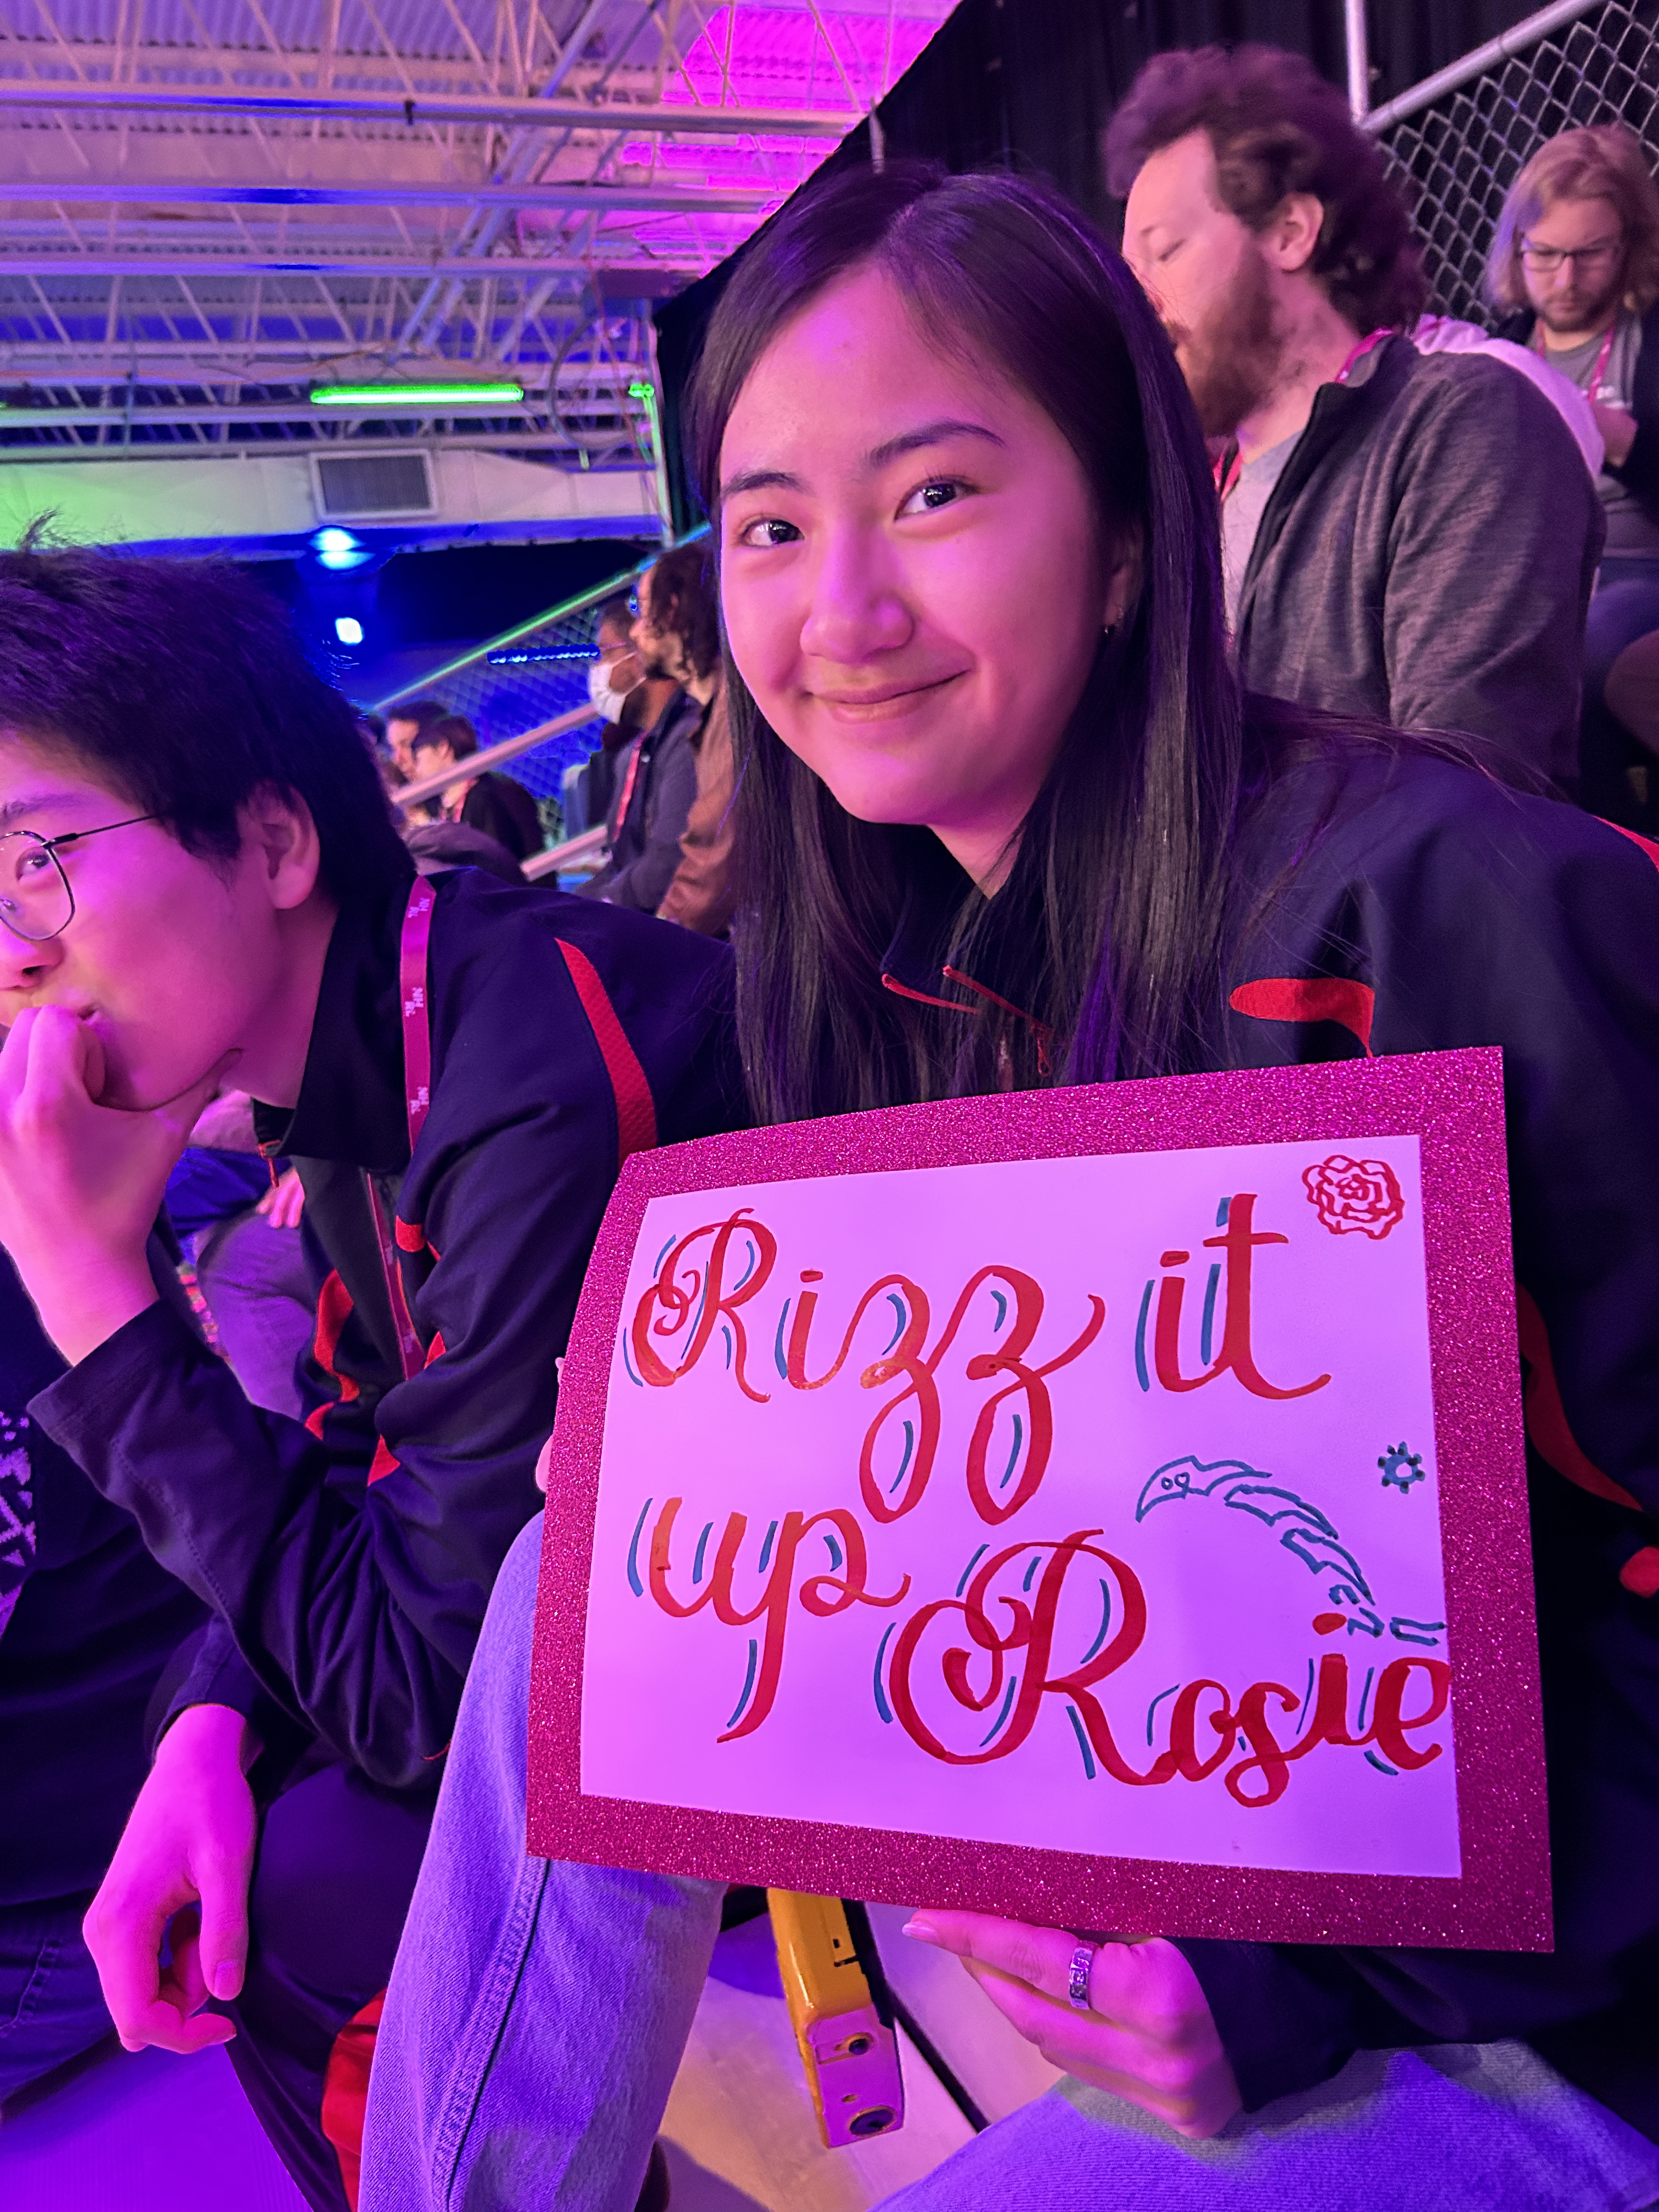 Grace holding up a sign supporting Rosie